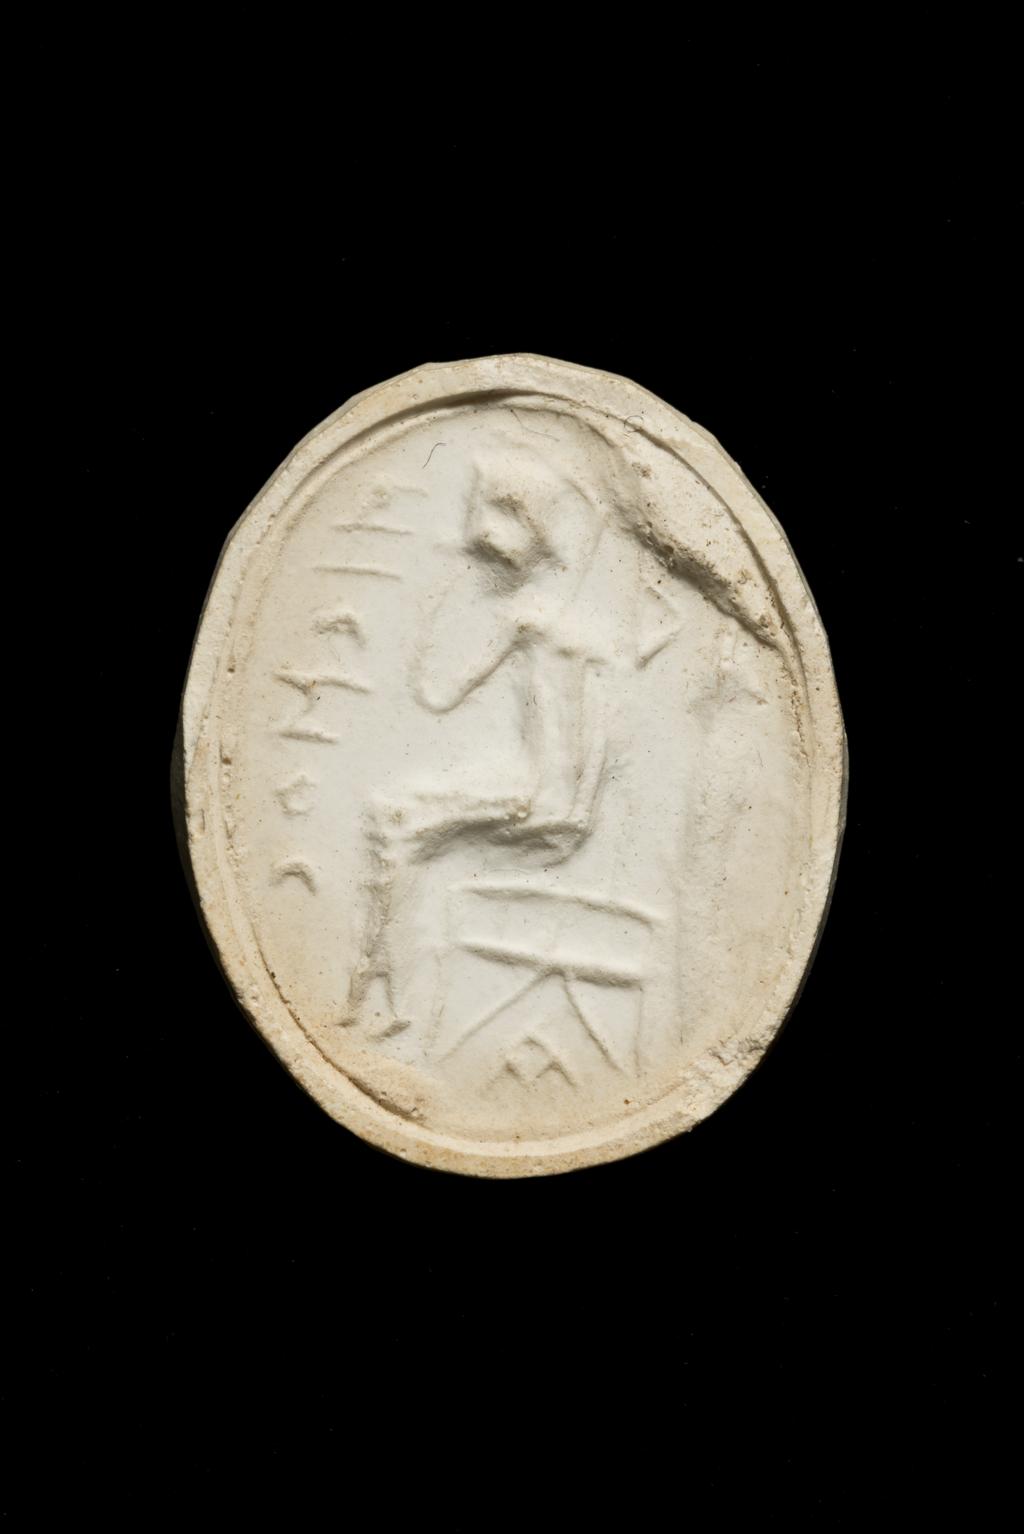 An image of Engraved gems. Magical amulet. Obverse: Horus. Reverse: Inscription. Intaglio cutting, schist, 201-400 AD. Roman.